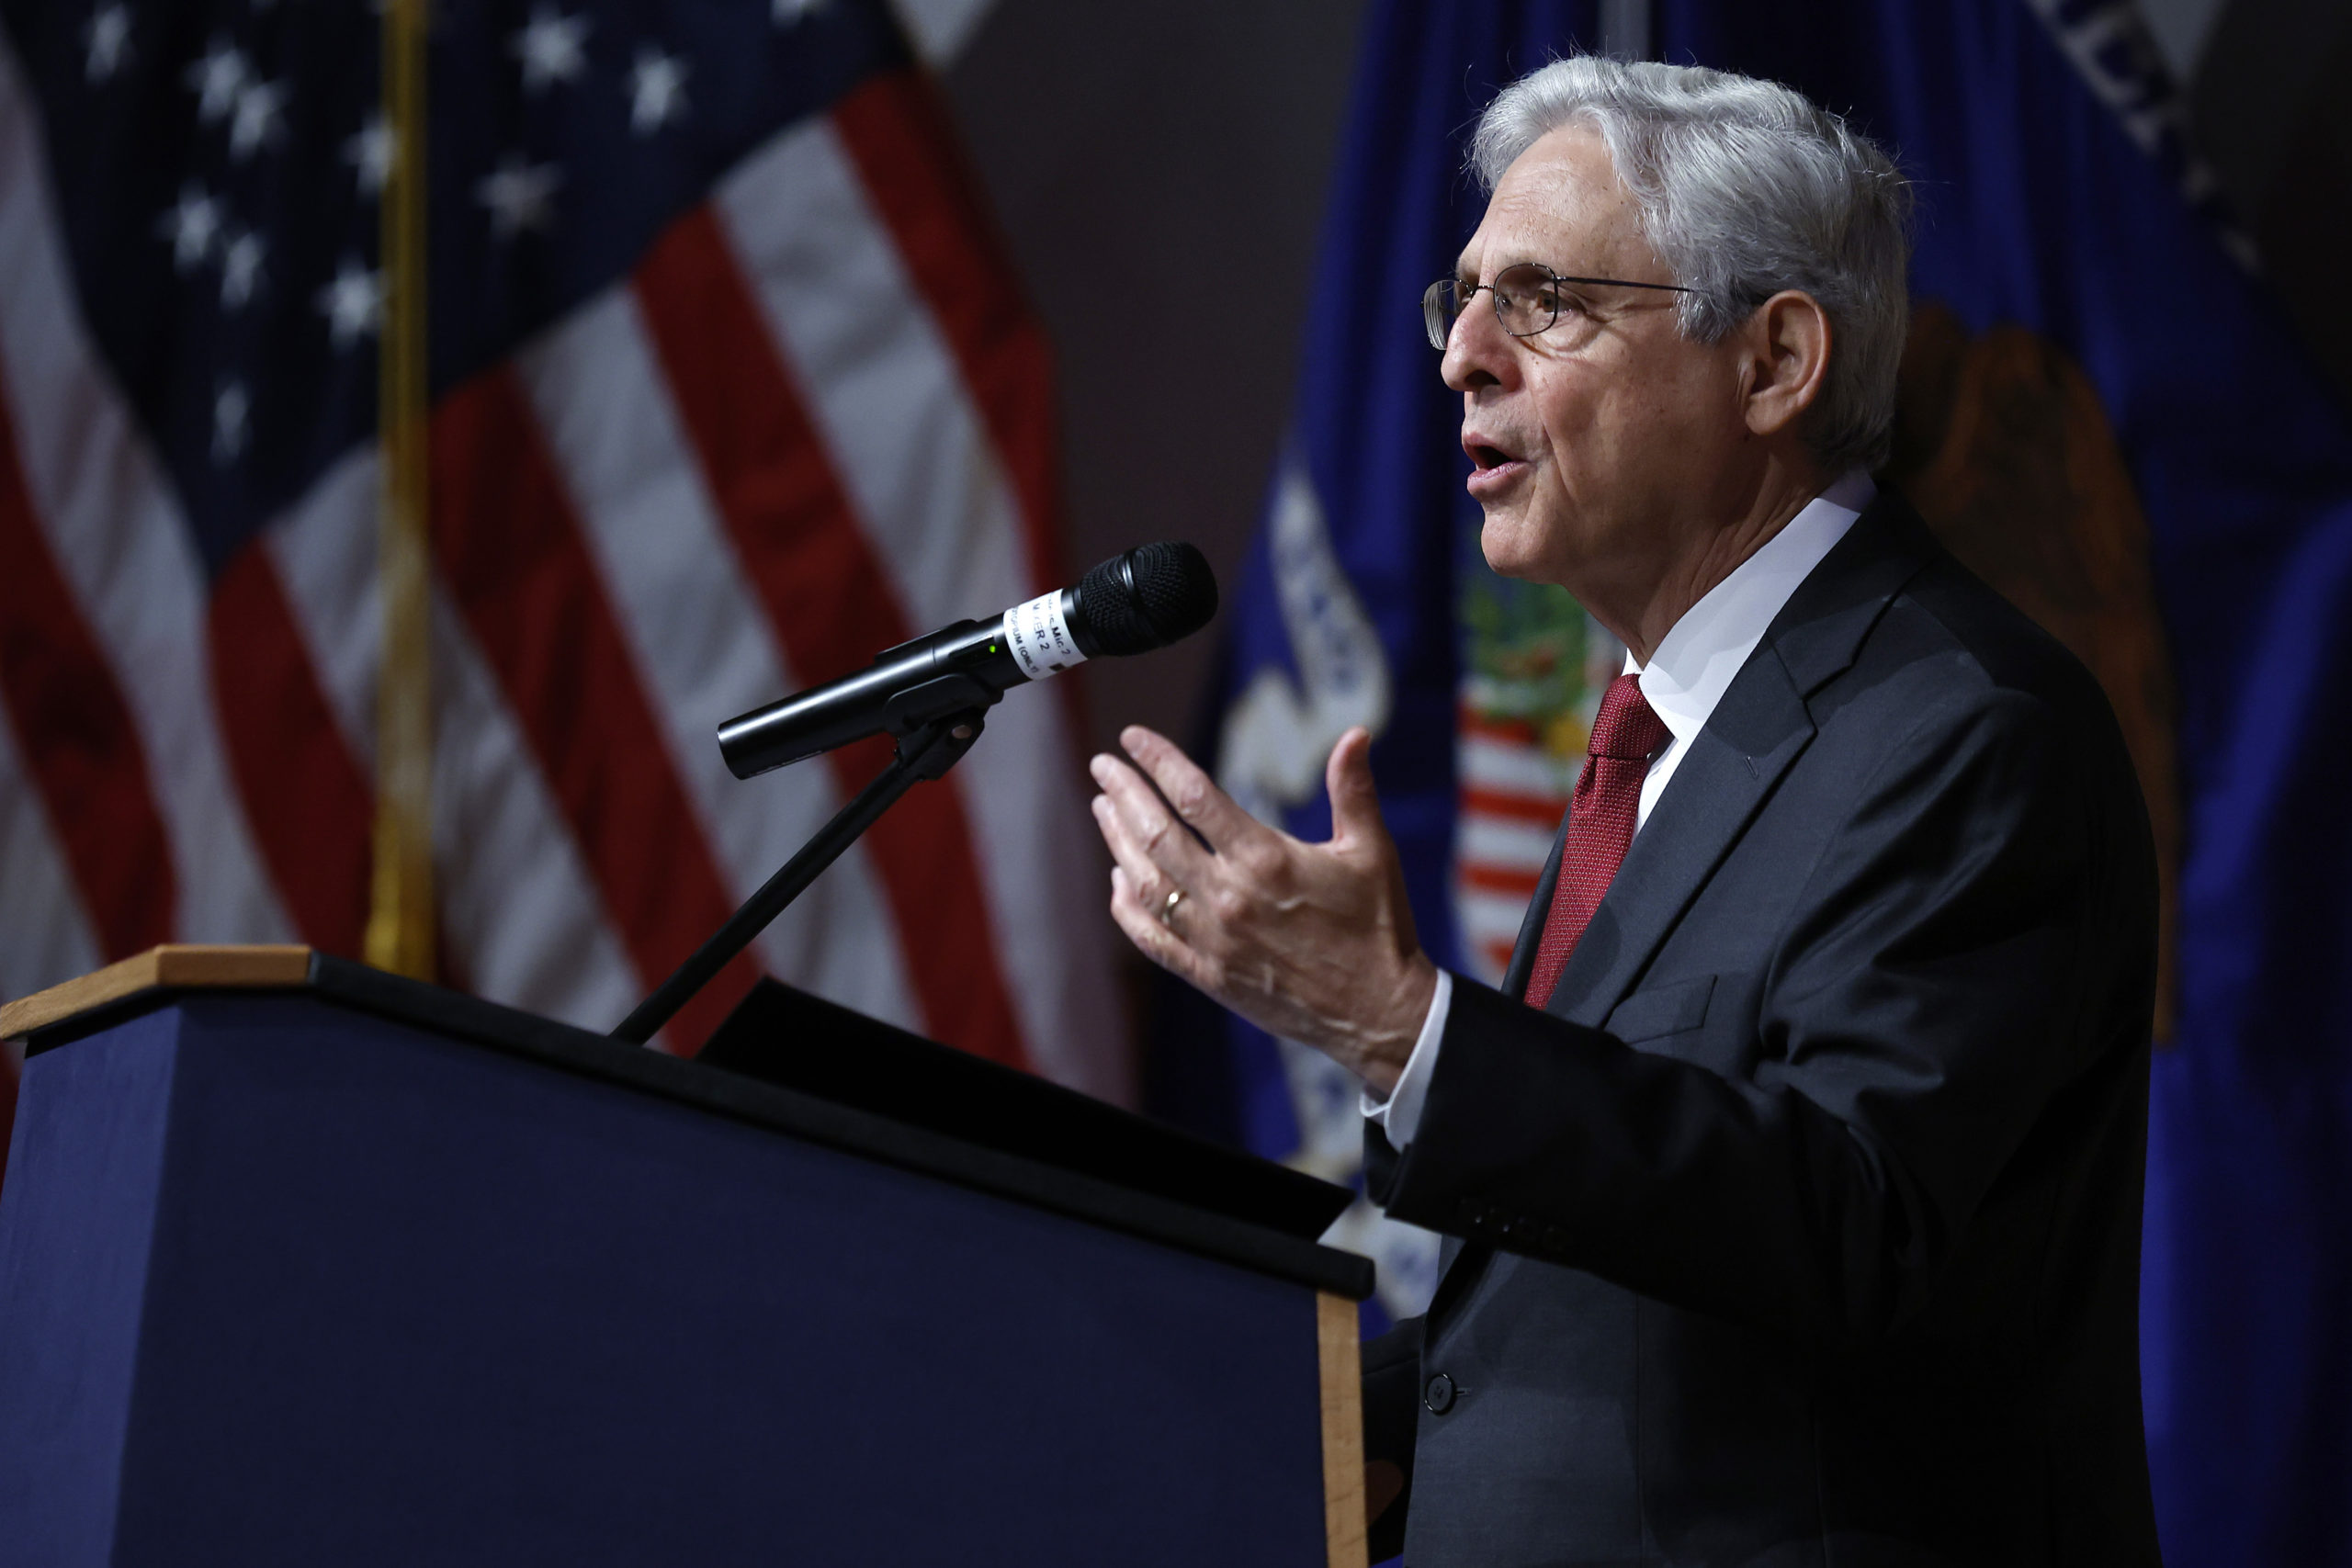 WASHINGTON, DC - JUNE 22: U.S. Attorney General Merrick Garland addresses the second annual Chiefs of Police Executive Forum on Crime Guns at the headquarters of the Bureau of Alcohol, Tobacco, Firearms and Explosives (ATF) on June 22, 2023 in Washington, DC. (Chip Somodevilla/Getty Images)